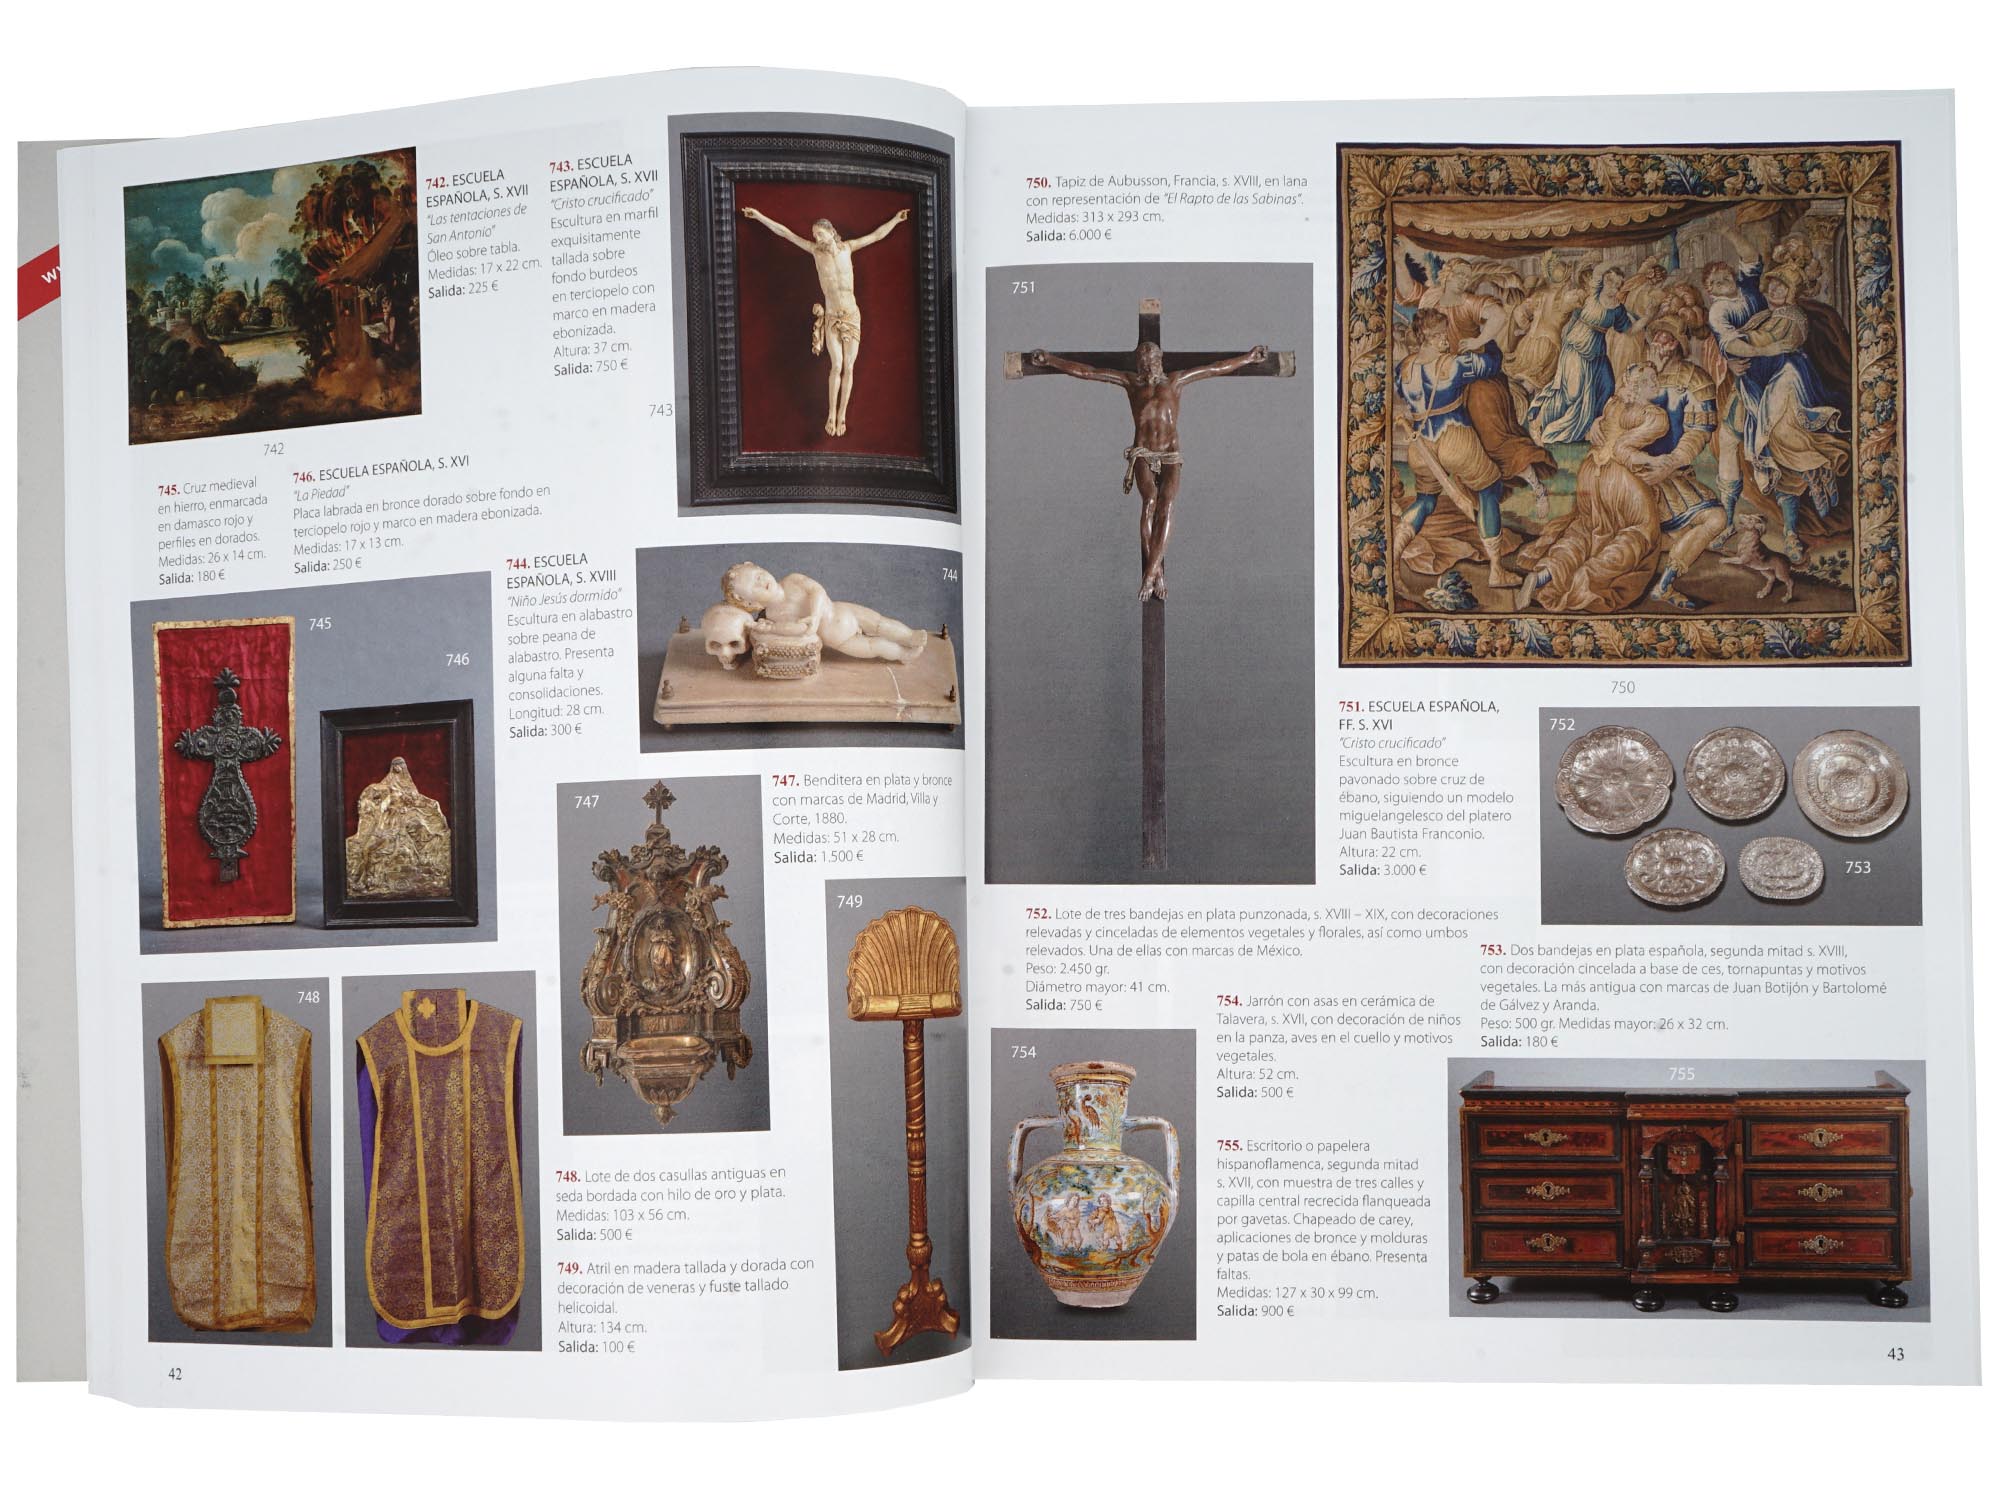 GROUP OF AMERICAN EUROPEAN ART AUCTION CATALOGS PIC-8